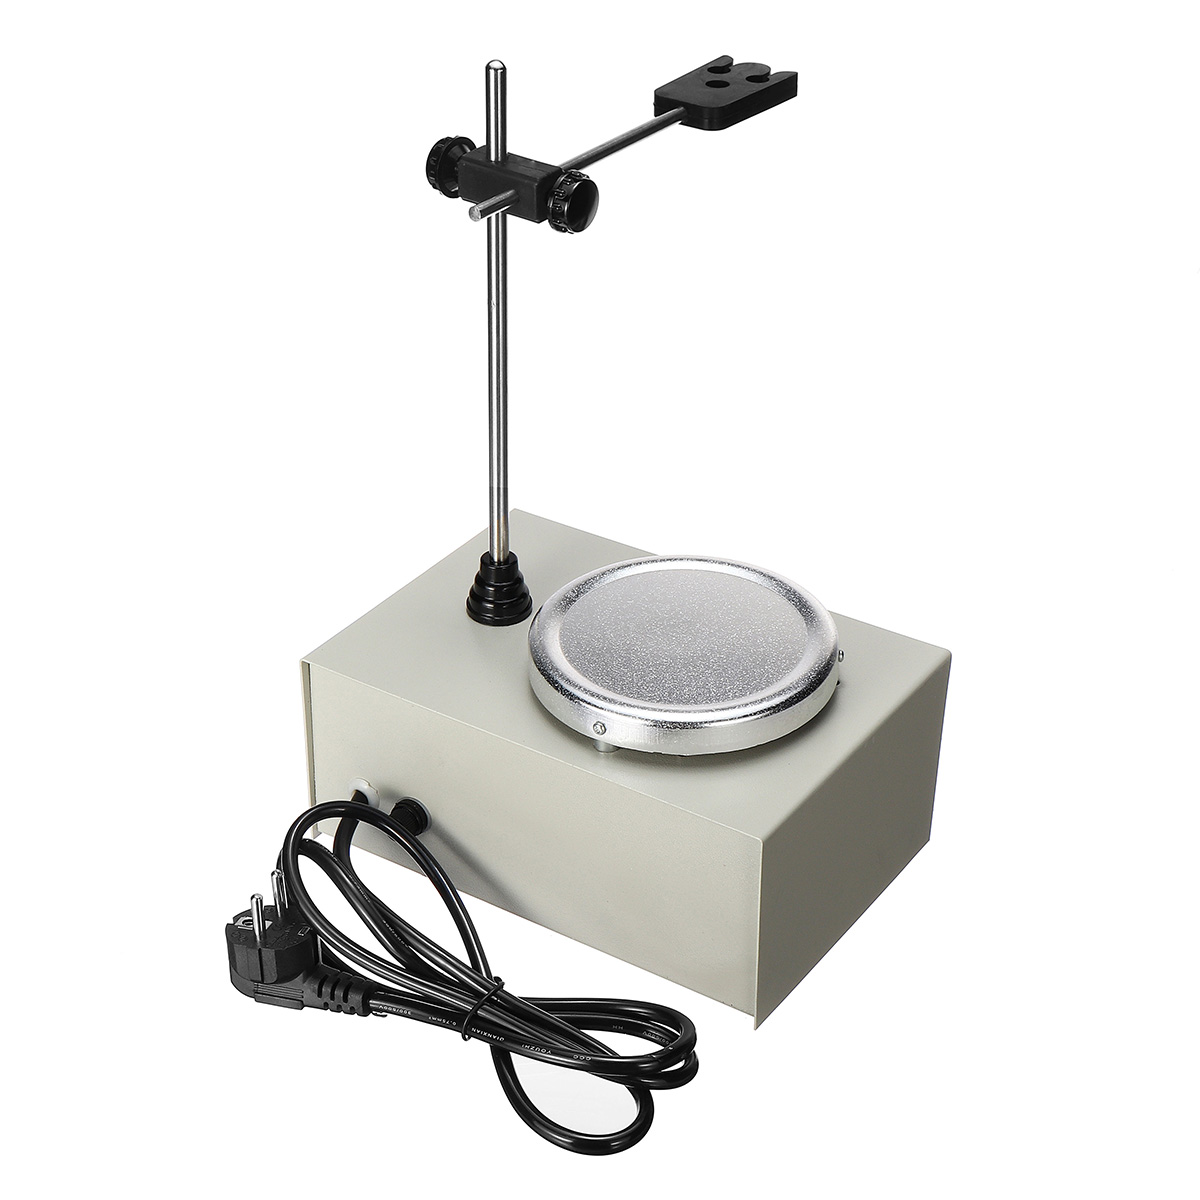 79-1-1000ML-Hot-Plate-Magnetic-Stirrer-Lab-Heating-Mixer-Temperature-Speed-Adjustable-1298966-7